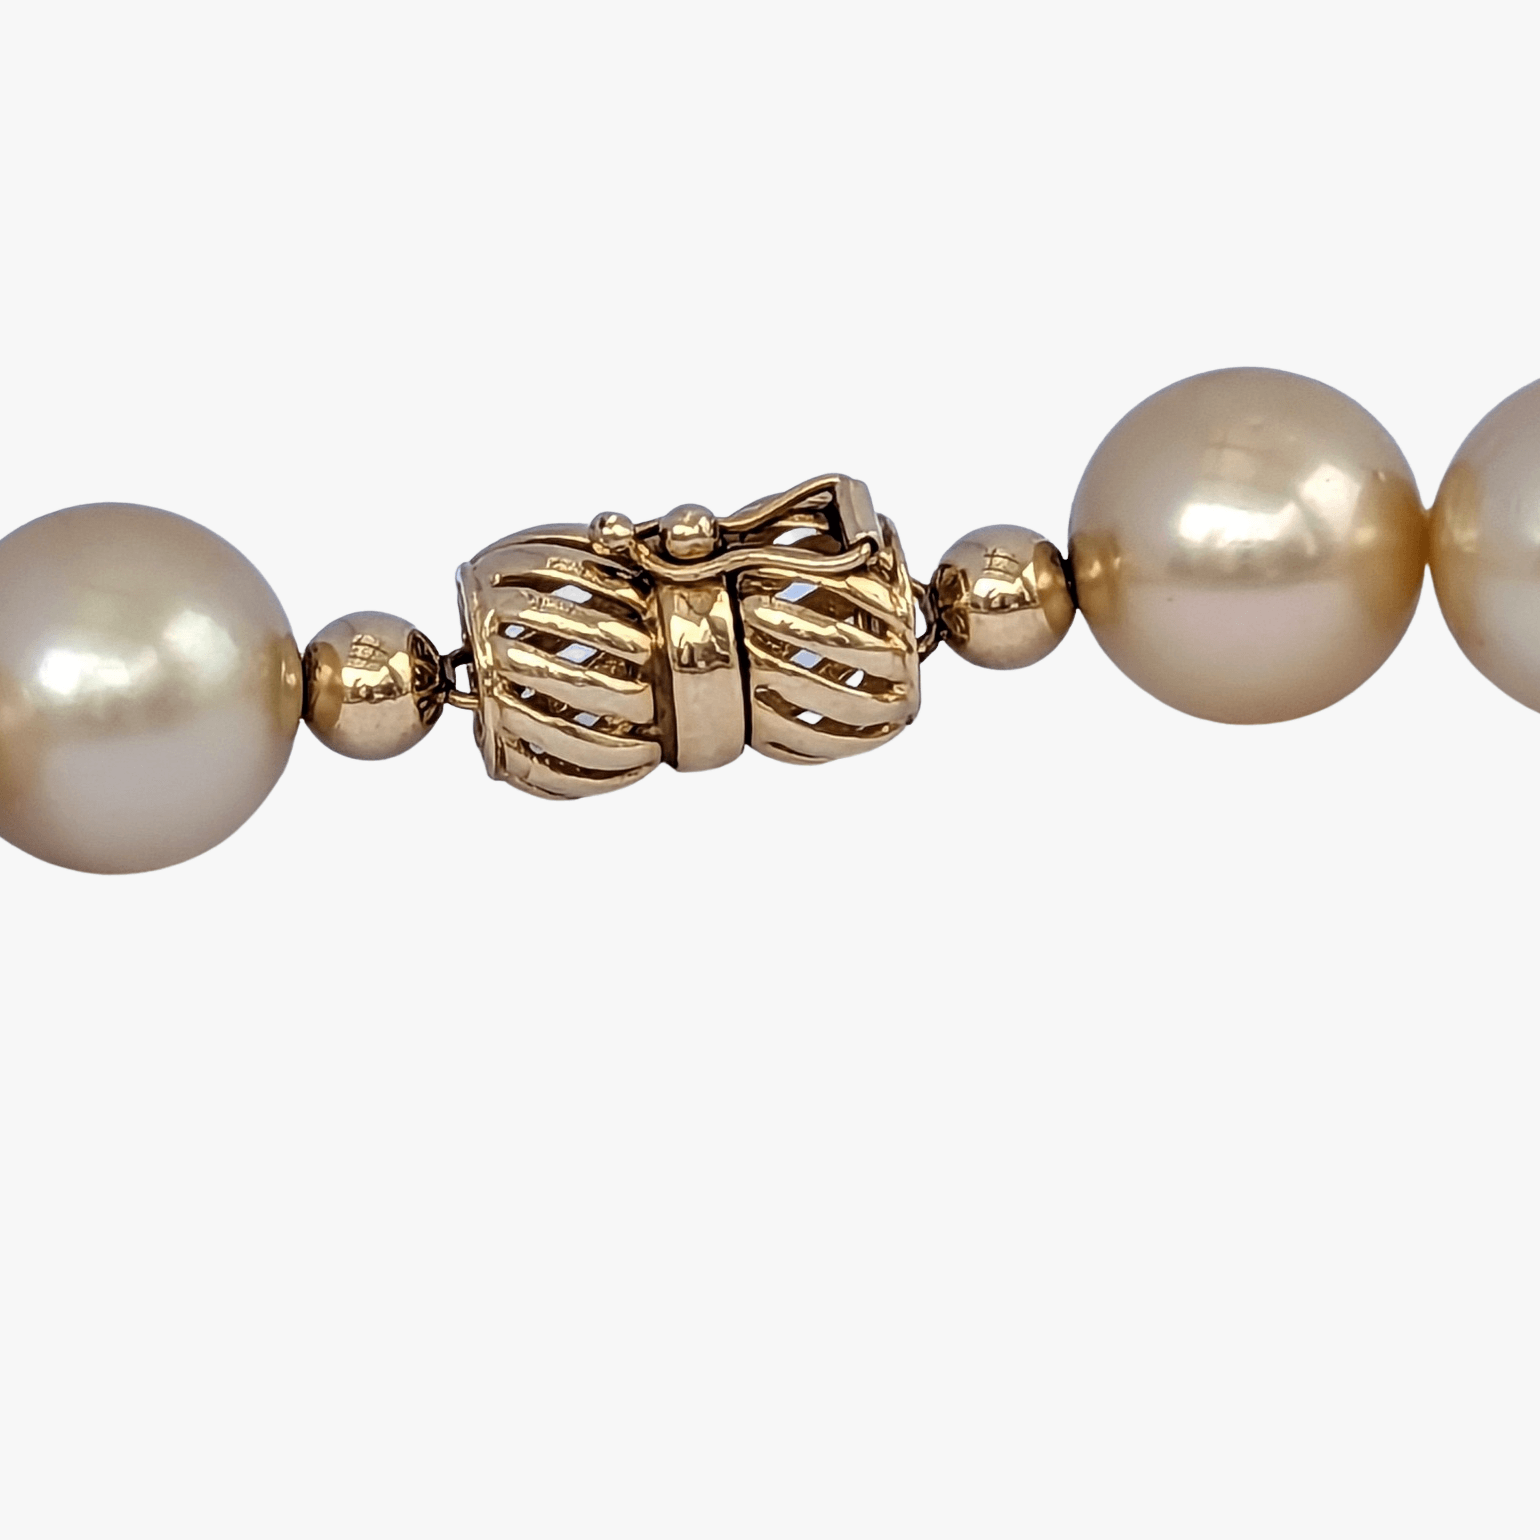 12-14mm GORGEOUS! Golden South Sea Pearl Necklace - Marina Korneev Fine Pearls